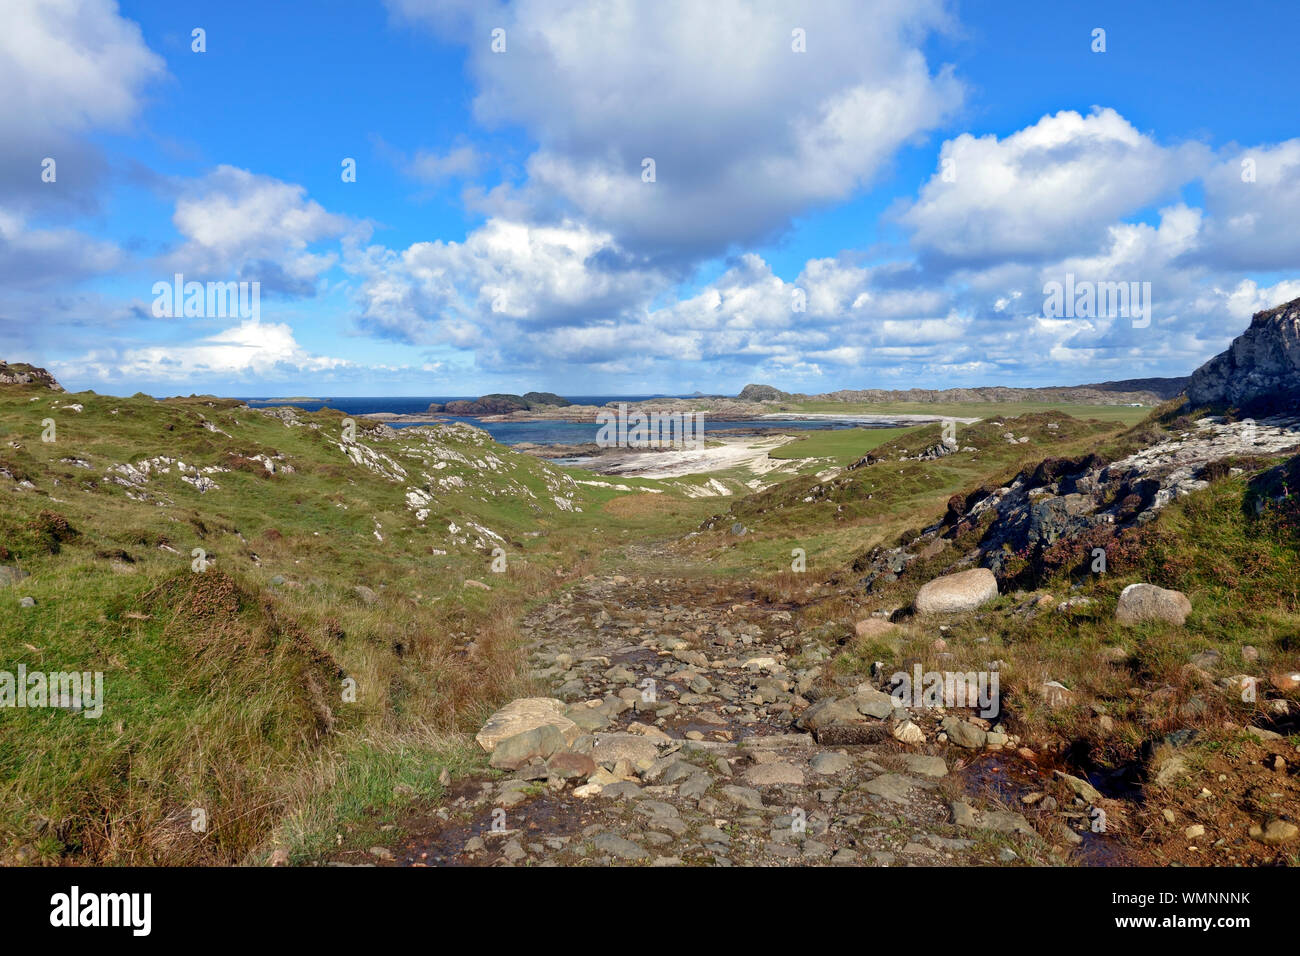 View to Camus Cuil an t-Saimh or Bay at the back of the Ocean on Iona, Inner Hebrides, Scotland. It's called this as the next stop is North America. Stock Photo